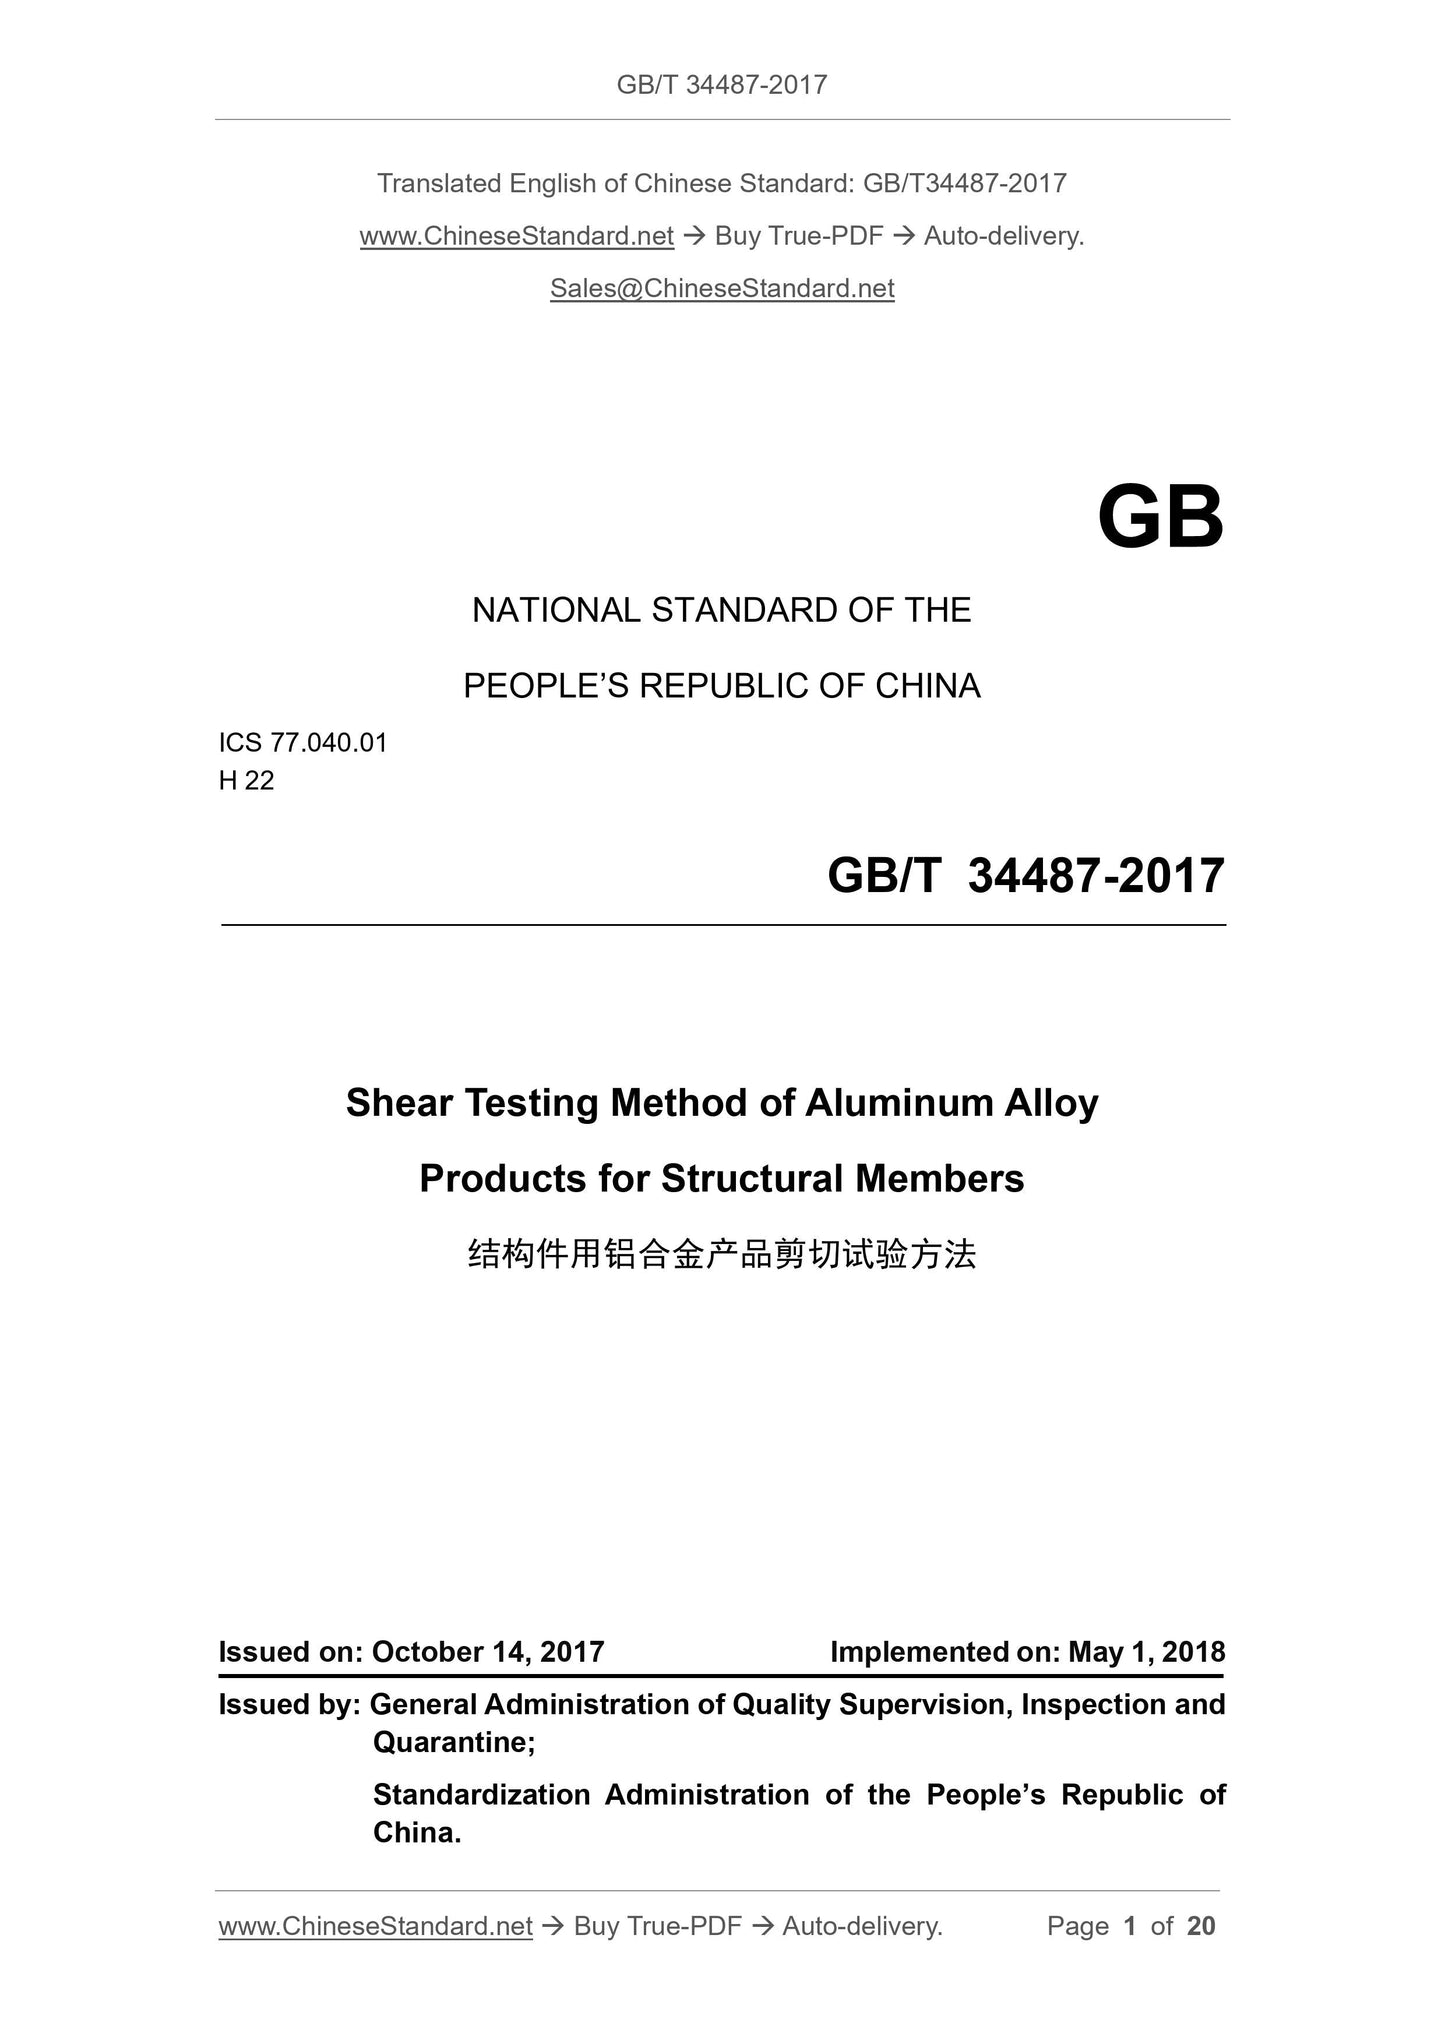 GB/T 34487-2017 Page 1